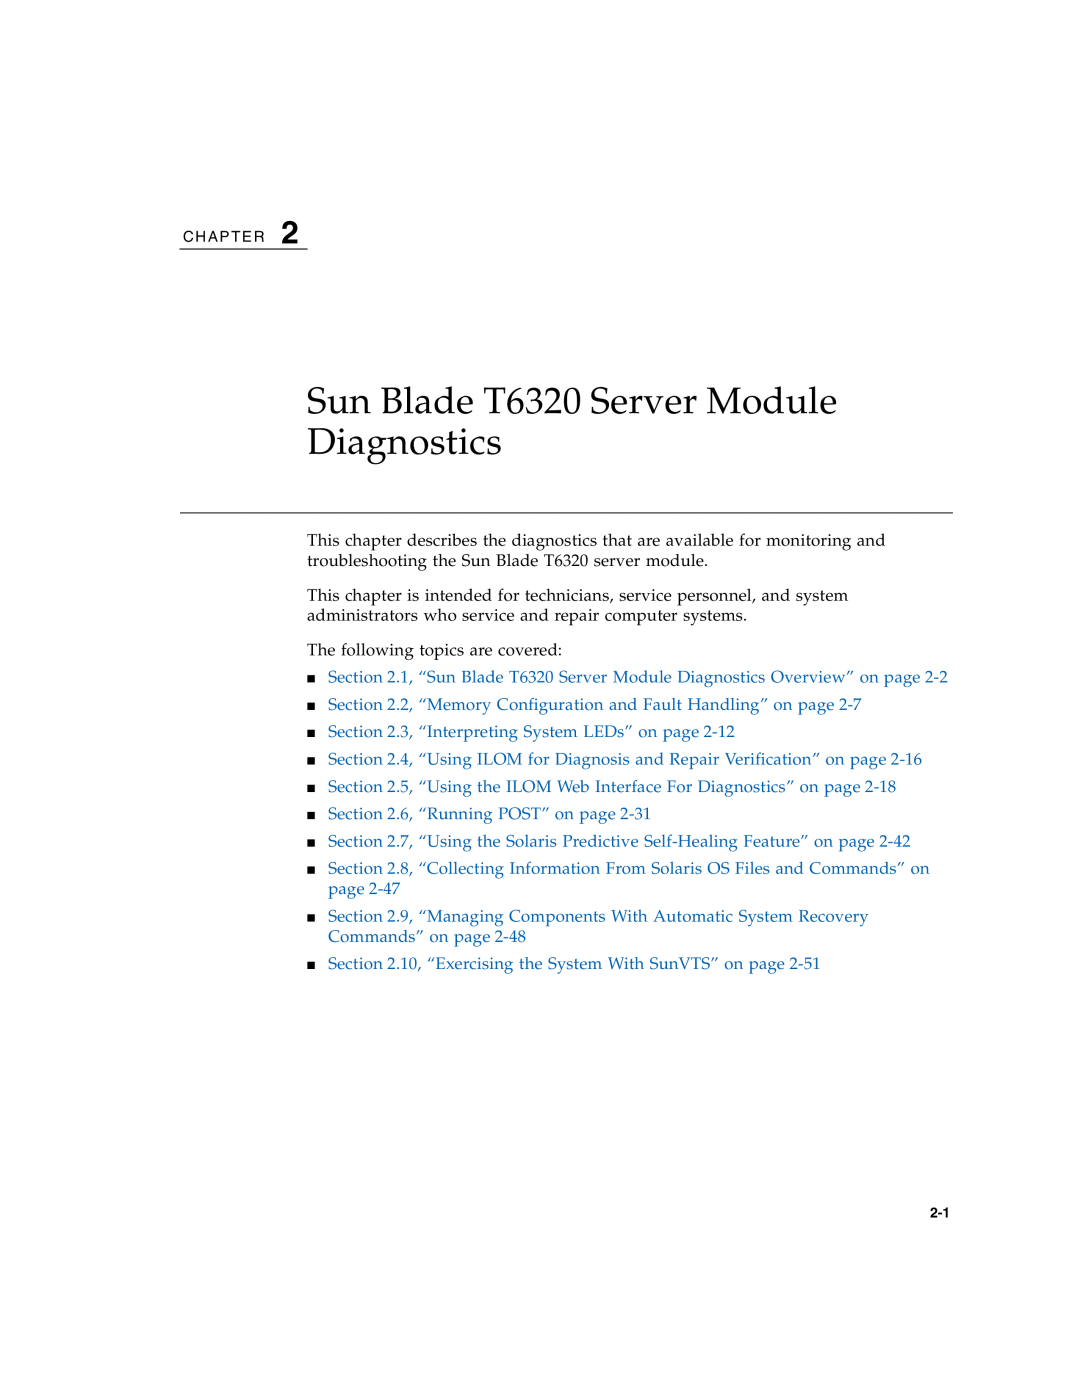 Sun Microsystems Sun Blade T6320 Server Module Diagnostics, 2, “Memory Configuration and Fault Handling” on page 